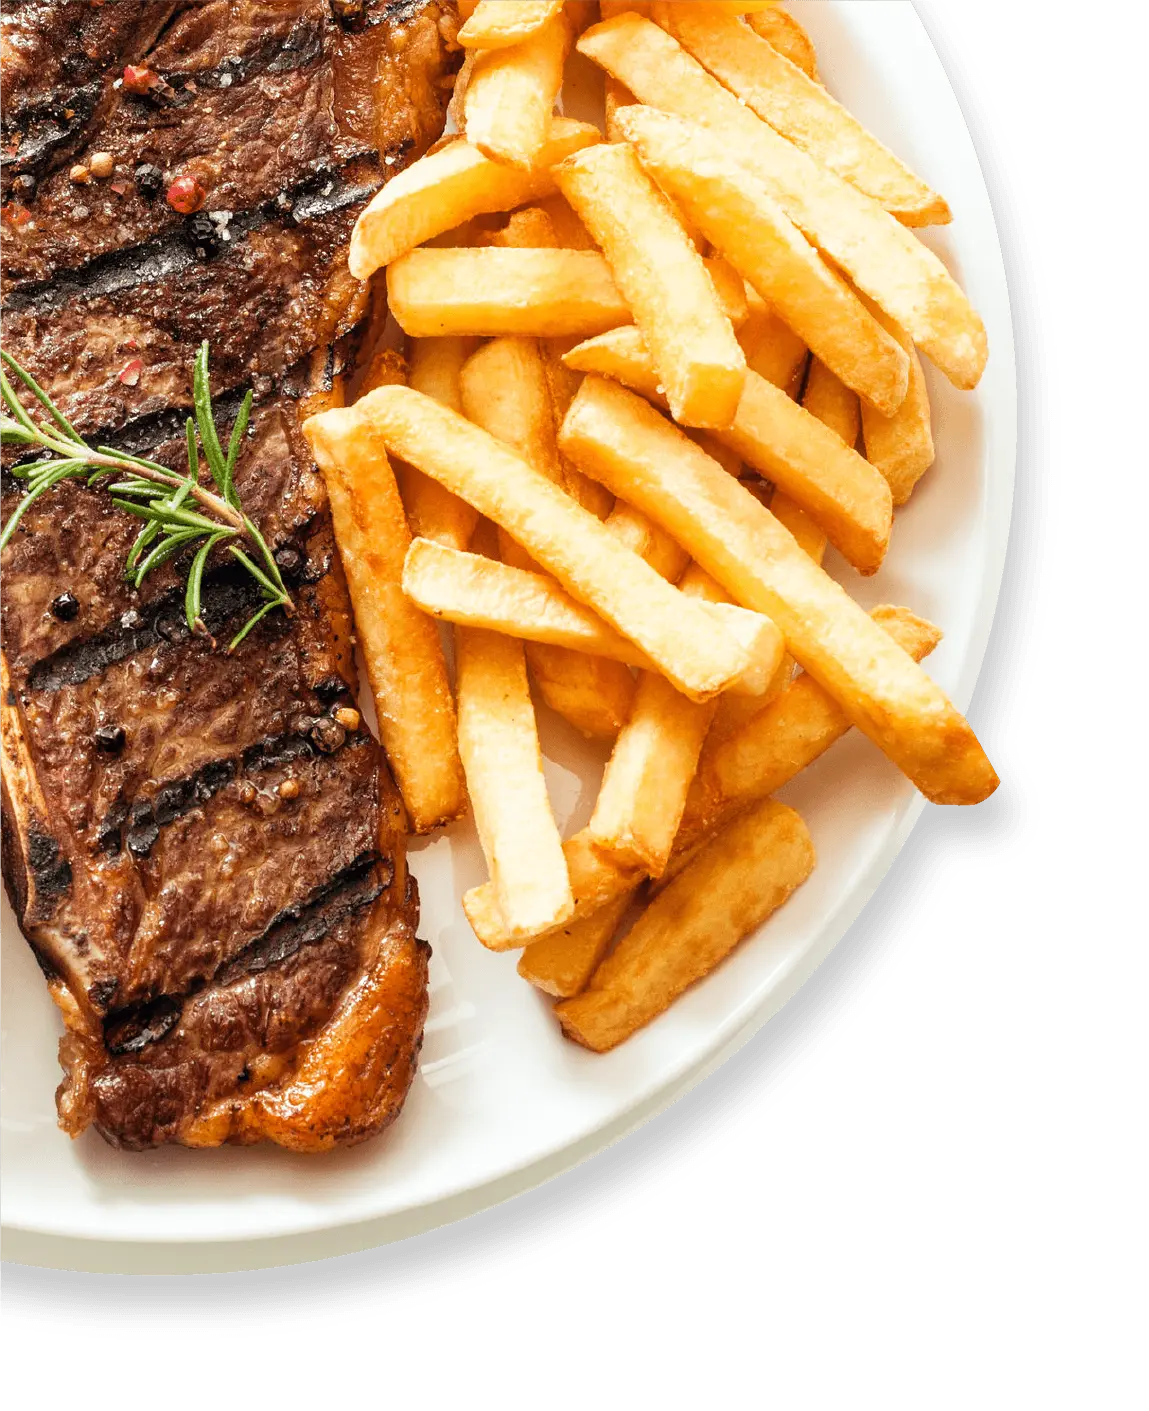 White Plate with a Serving of Grilled Steak and French Fries